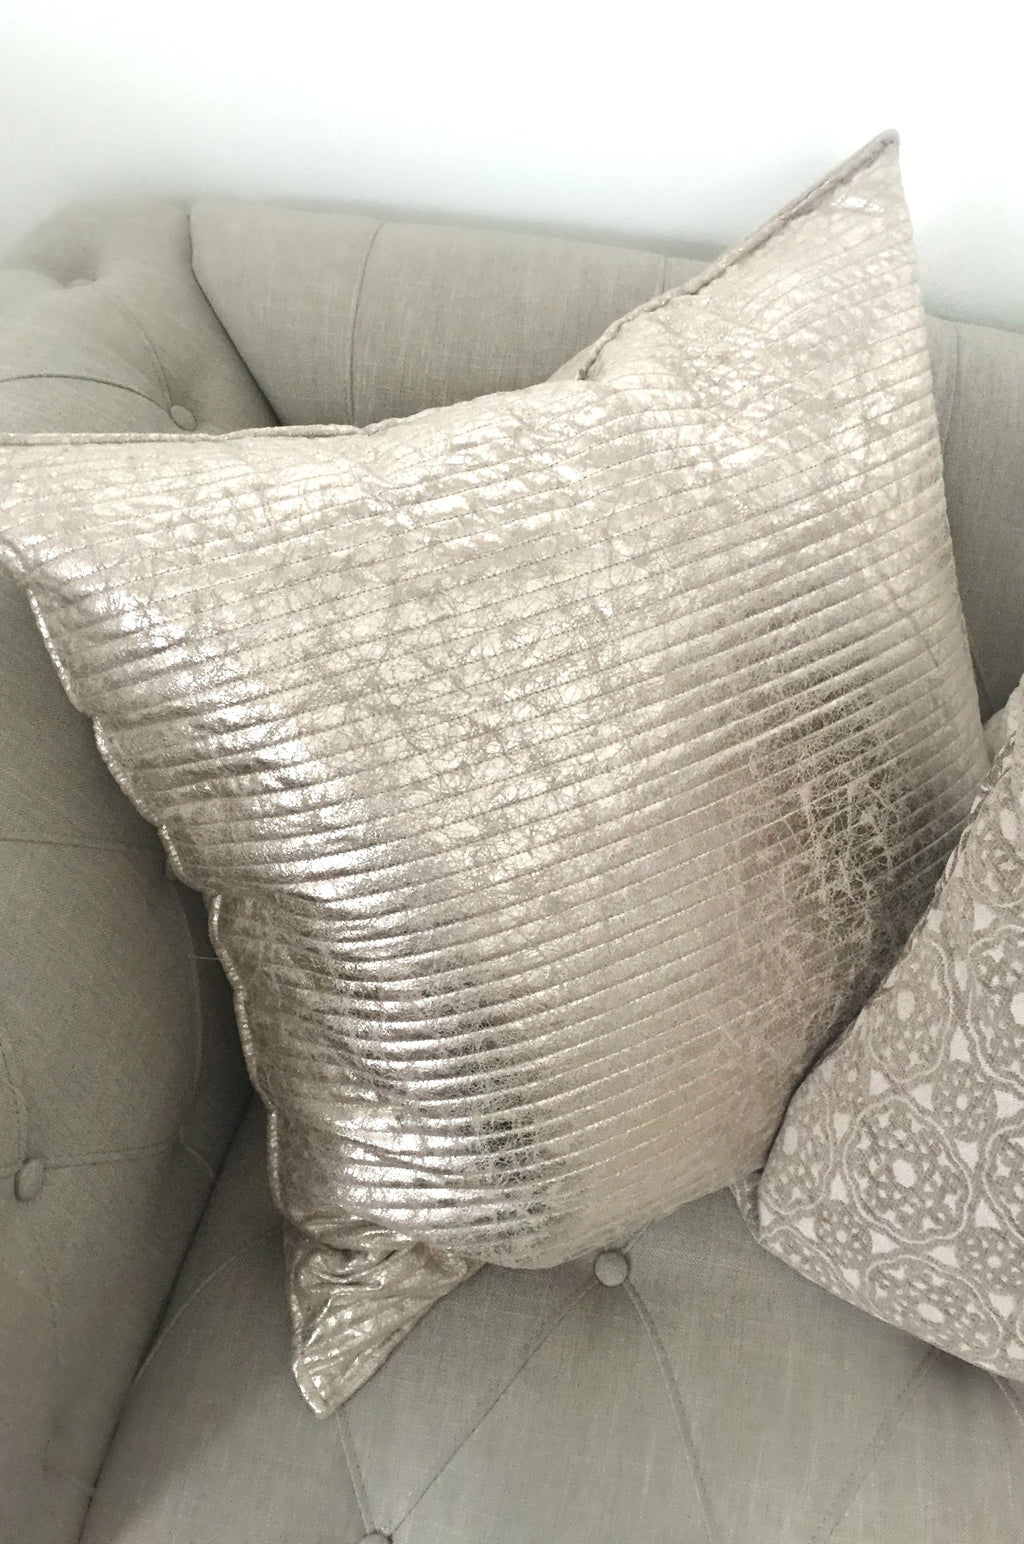 Shimmery silver decorative pillow